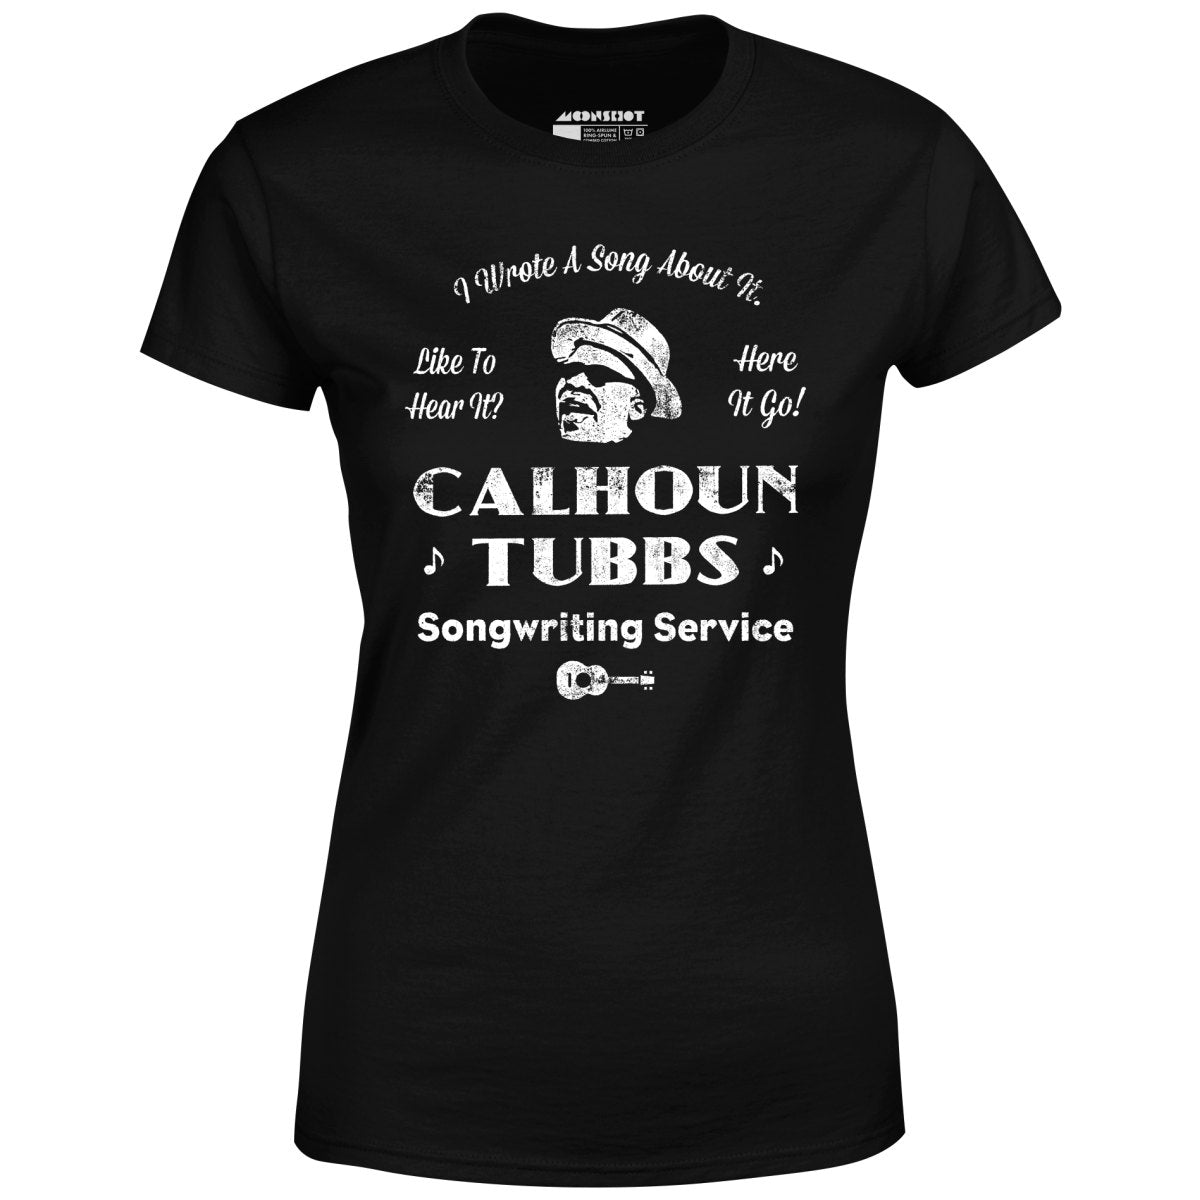 Calhoun Tubbs - I Wrote a Song About It - Women's T-Shirt